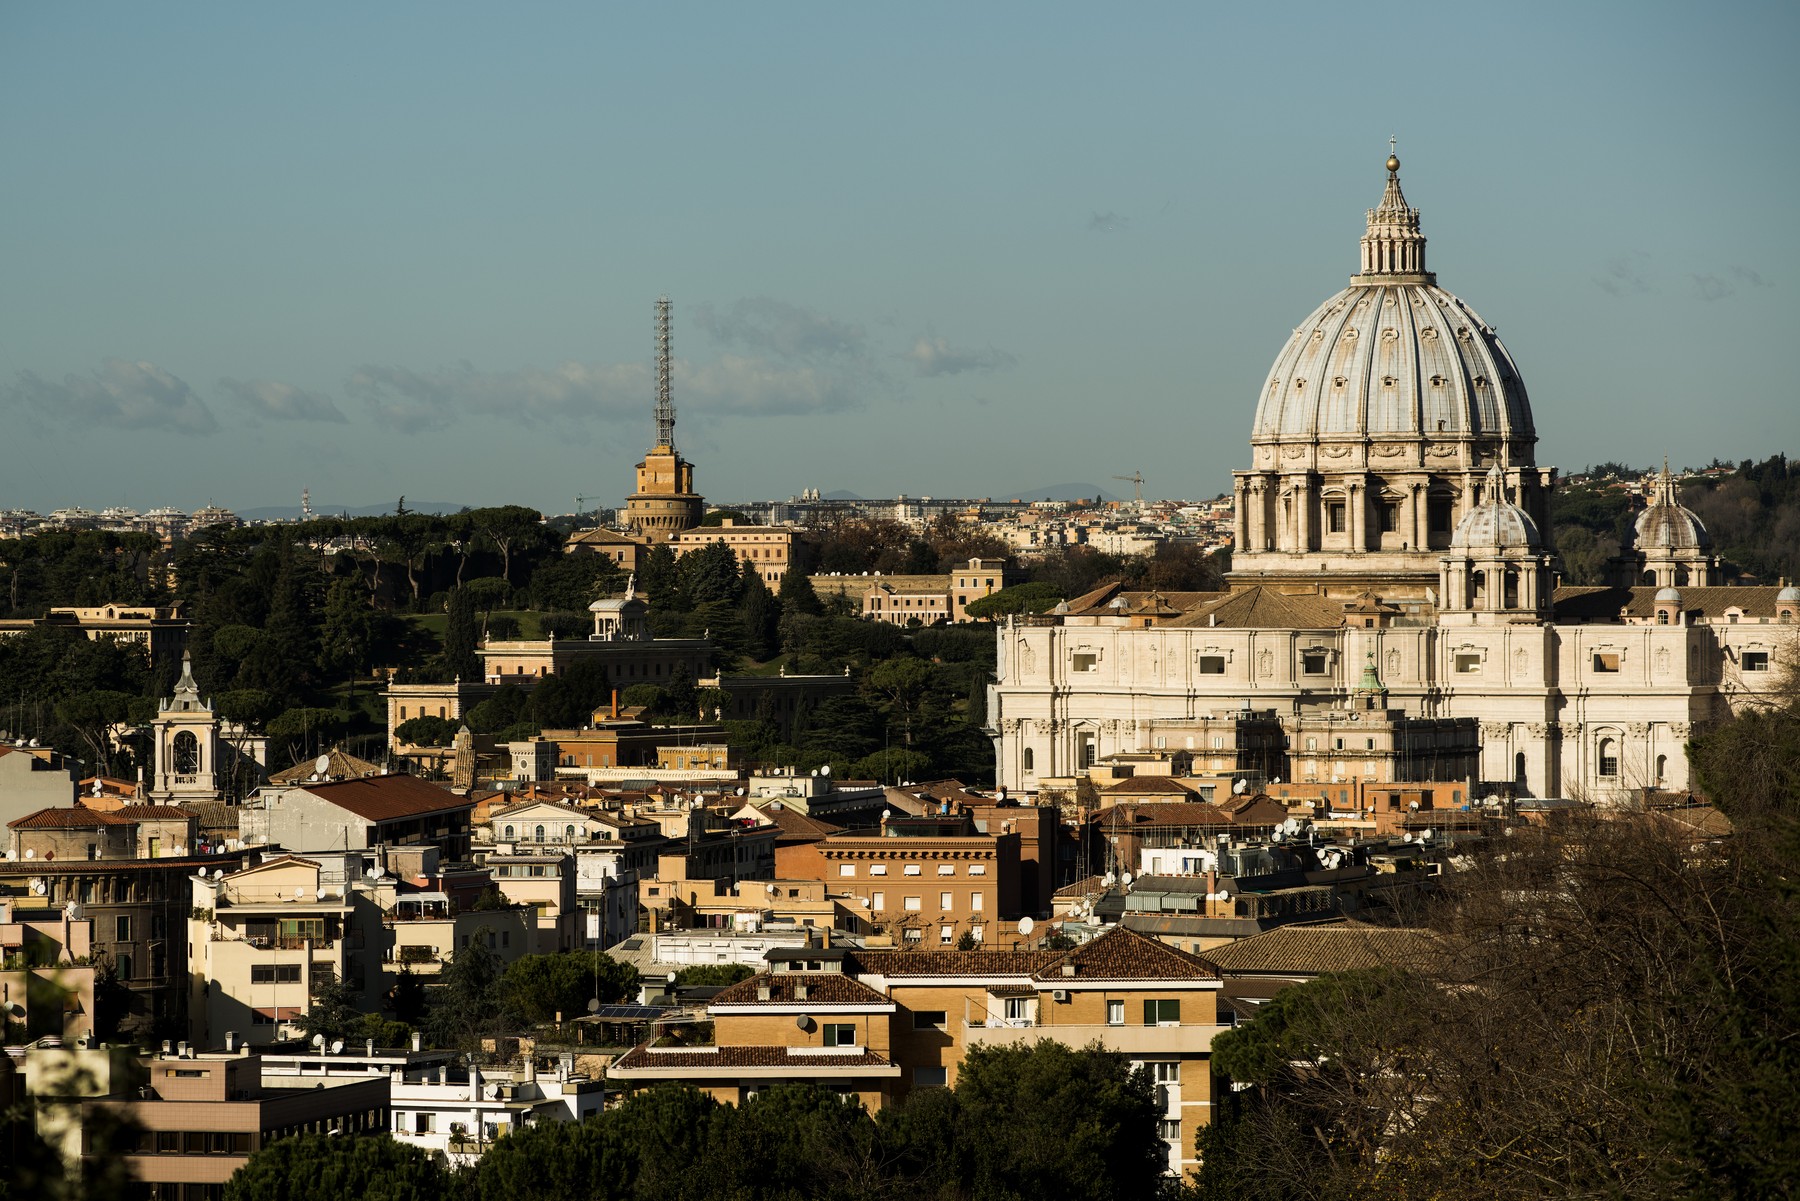 There is something huge hidden under the Vatican, St. Peter's Basilica is built on it